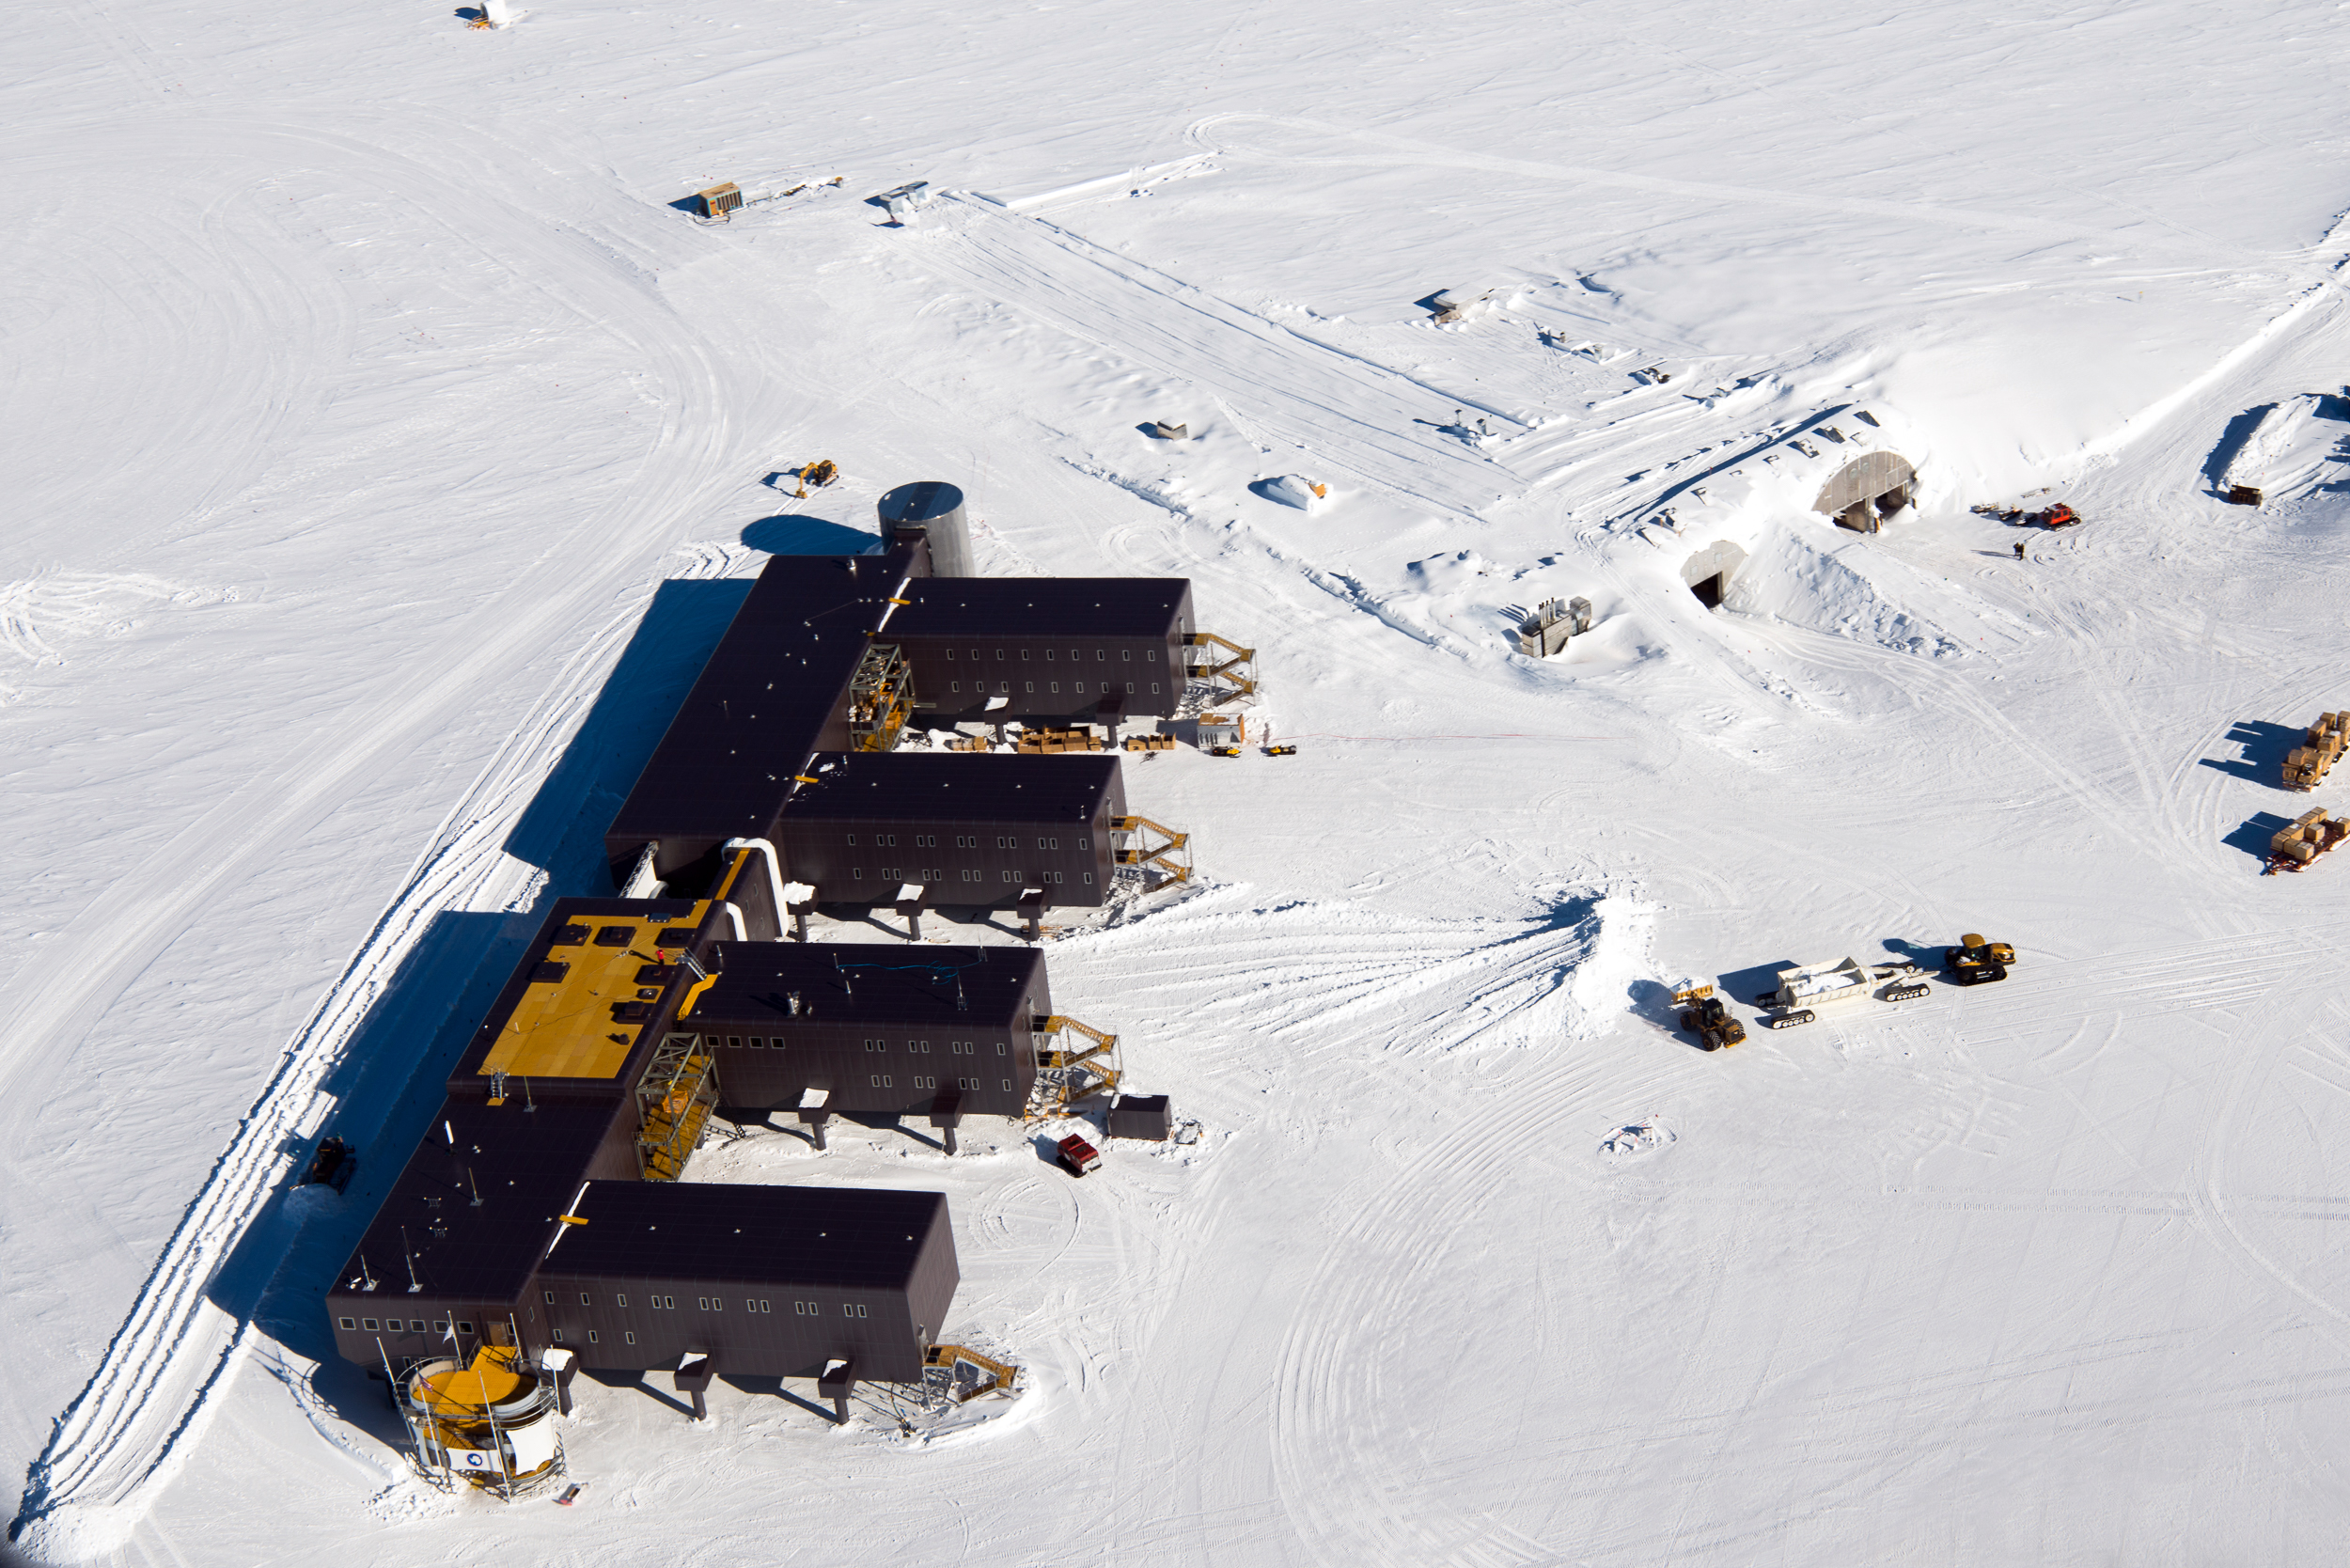 Aerial view of a large building on snow.